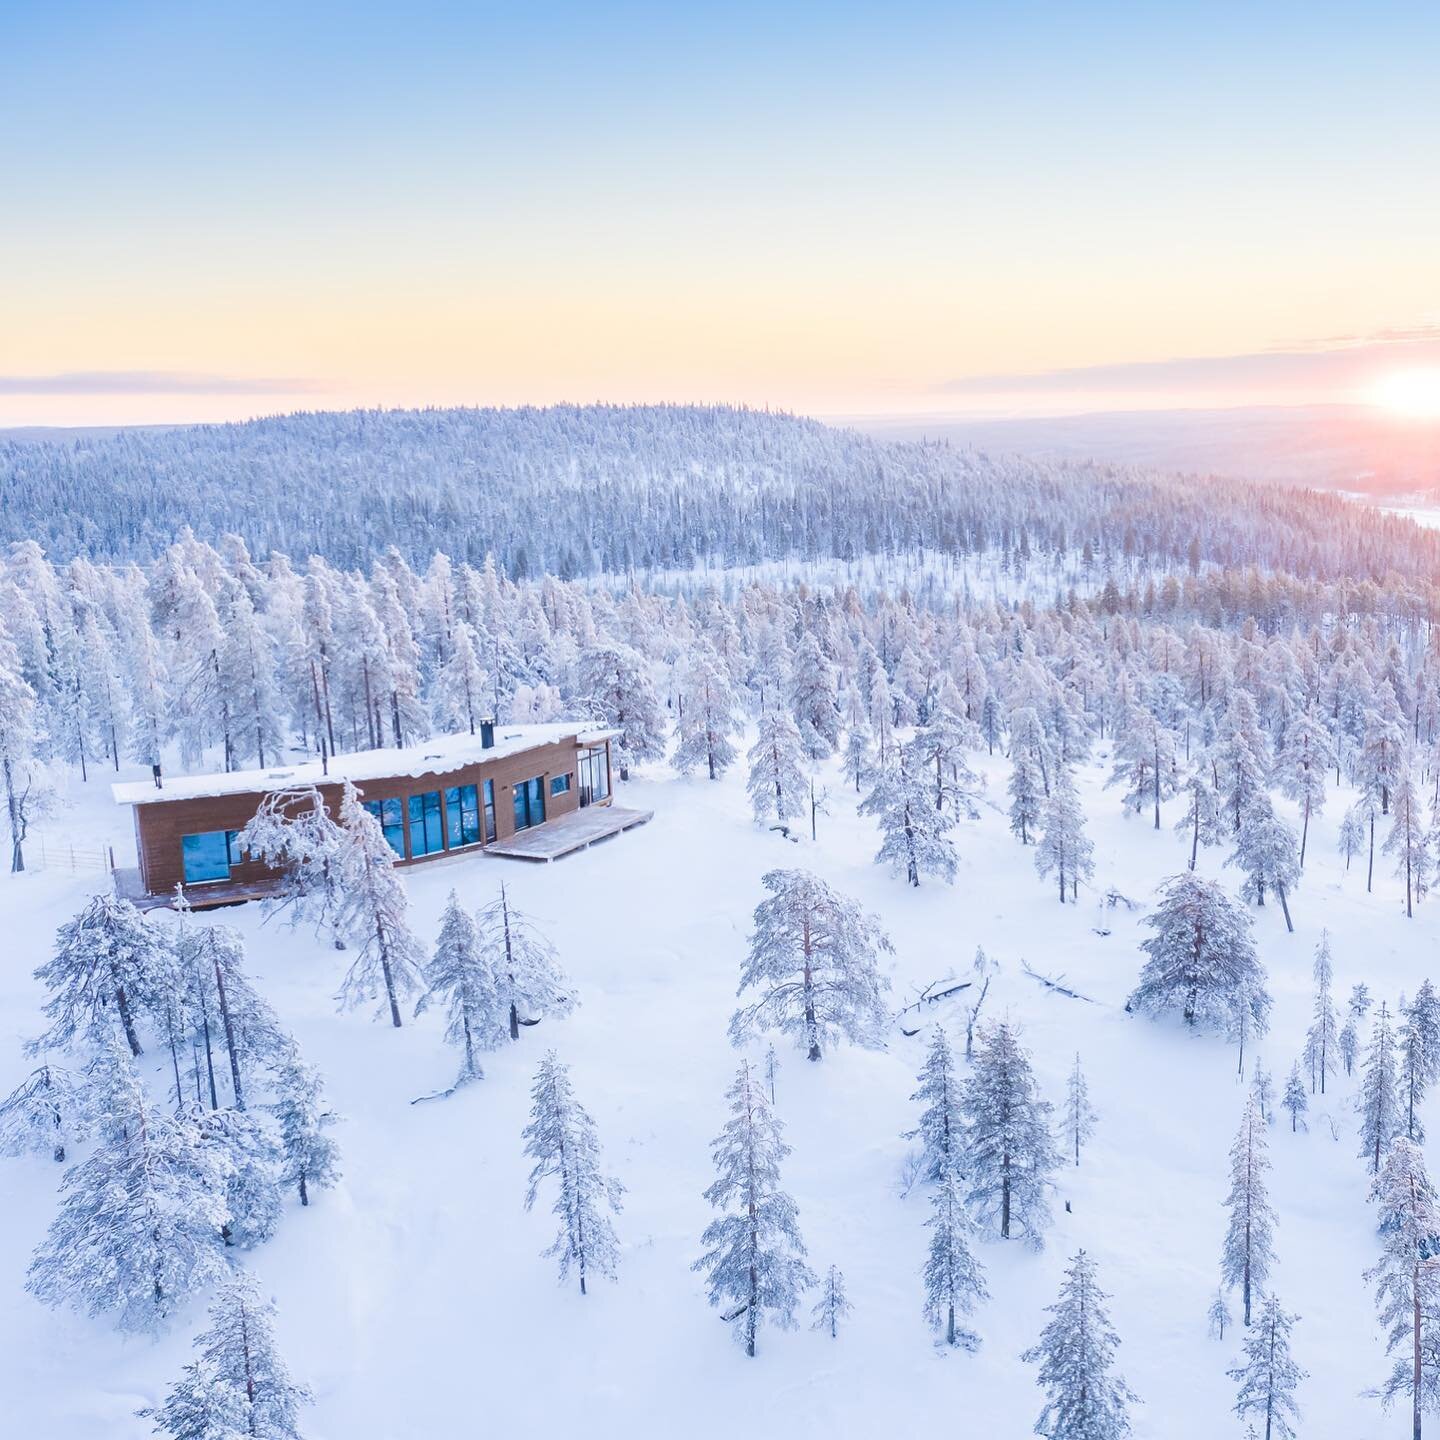 Octola Private Wilderness, deep within the Arctic Circle in a 300 acre reserve of Finnish Lapland, is truly the pinnacle of luxury retreats in the Nordics. 

From the lodge, you can see the Northern Lights from August all the way through to April, fr